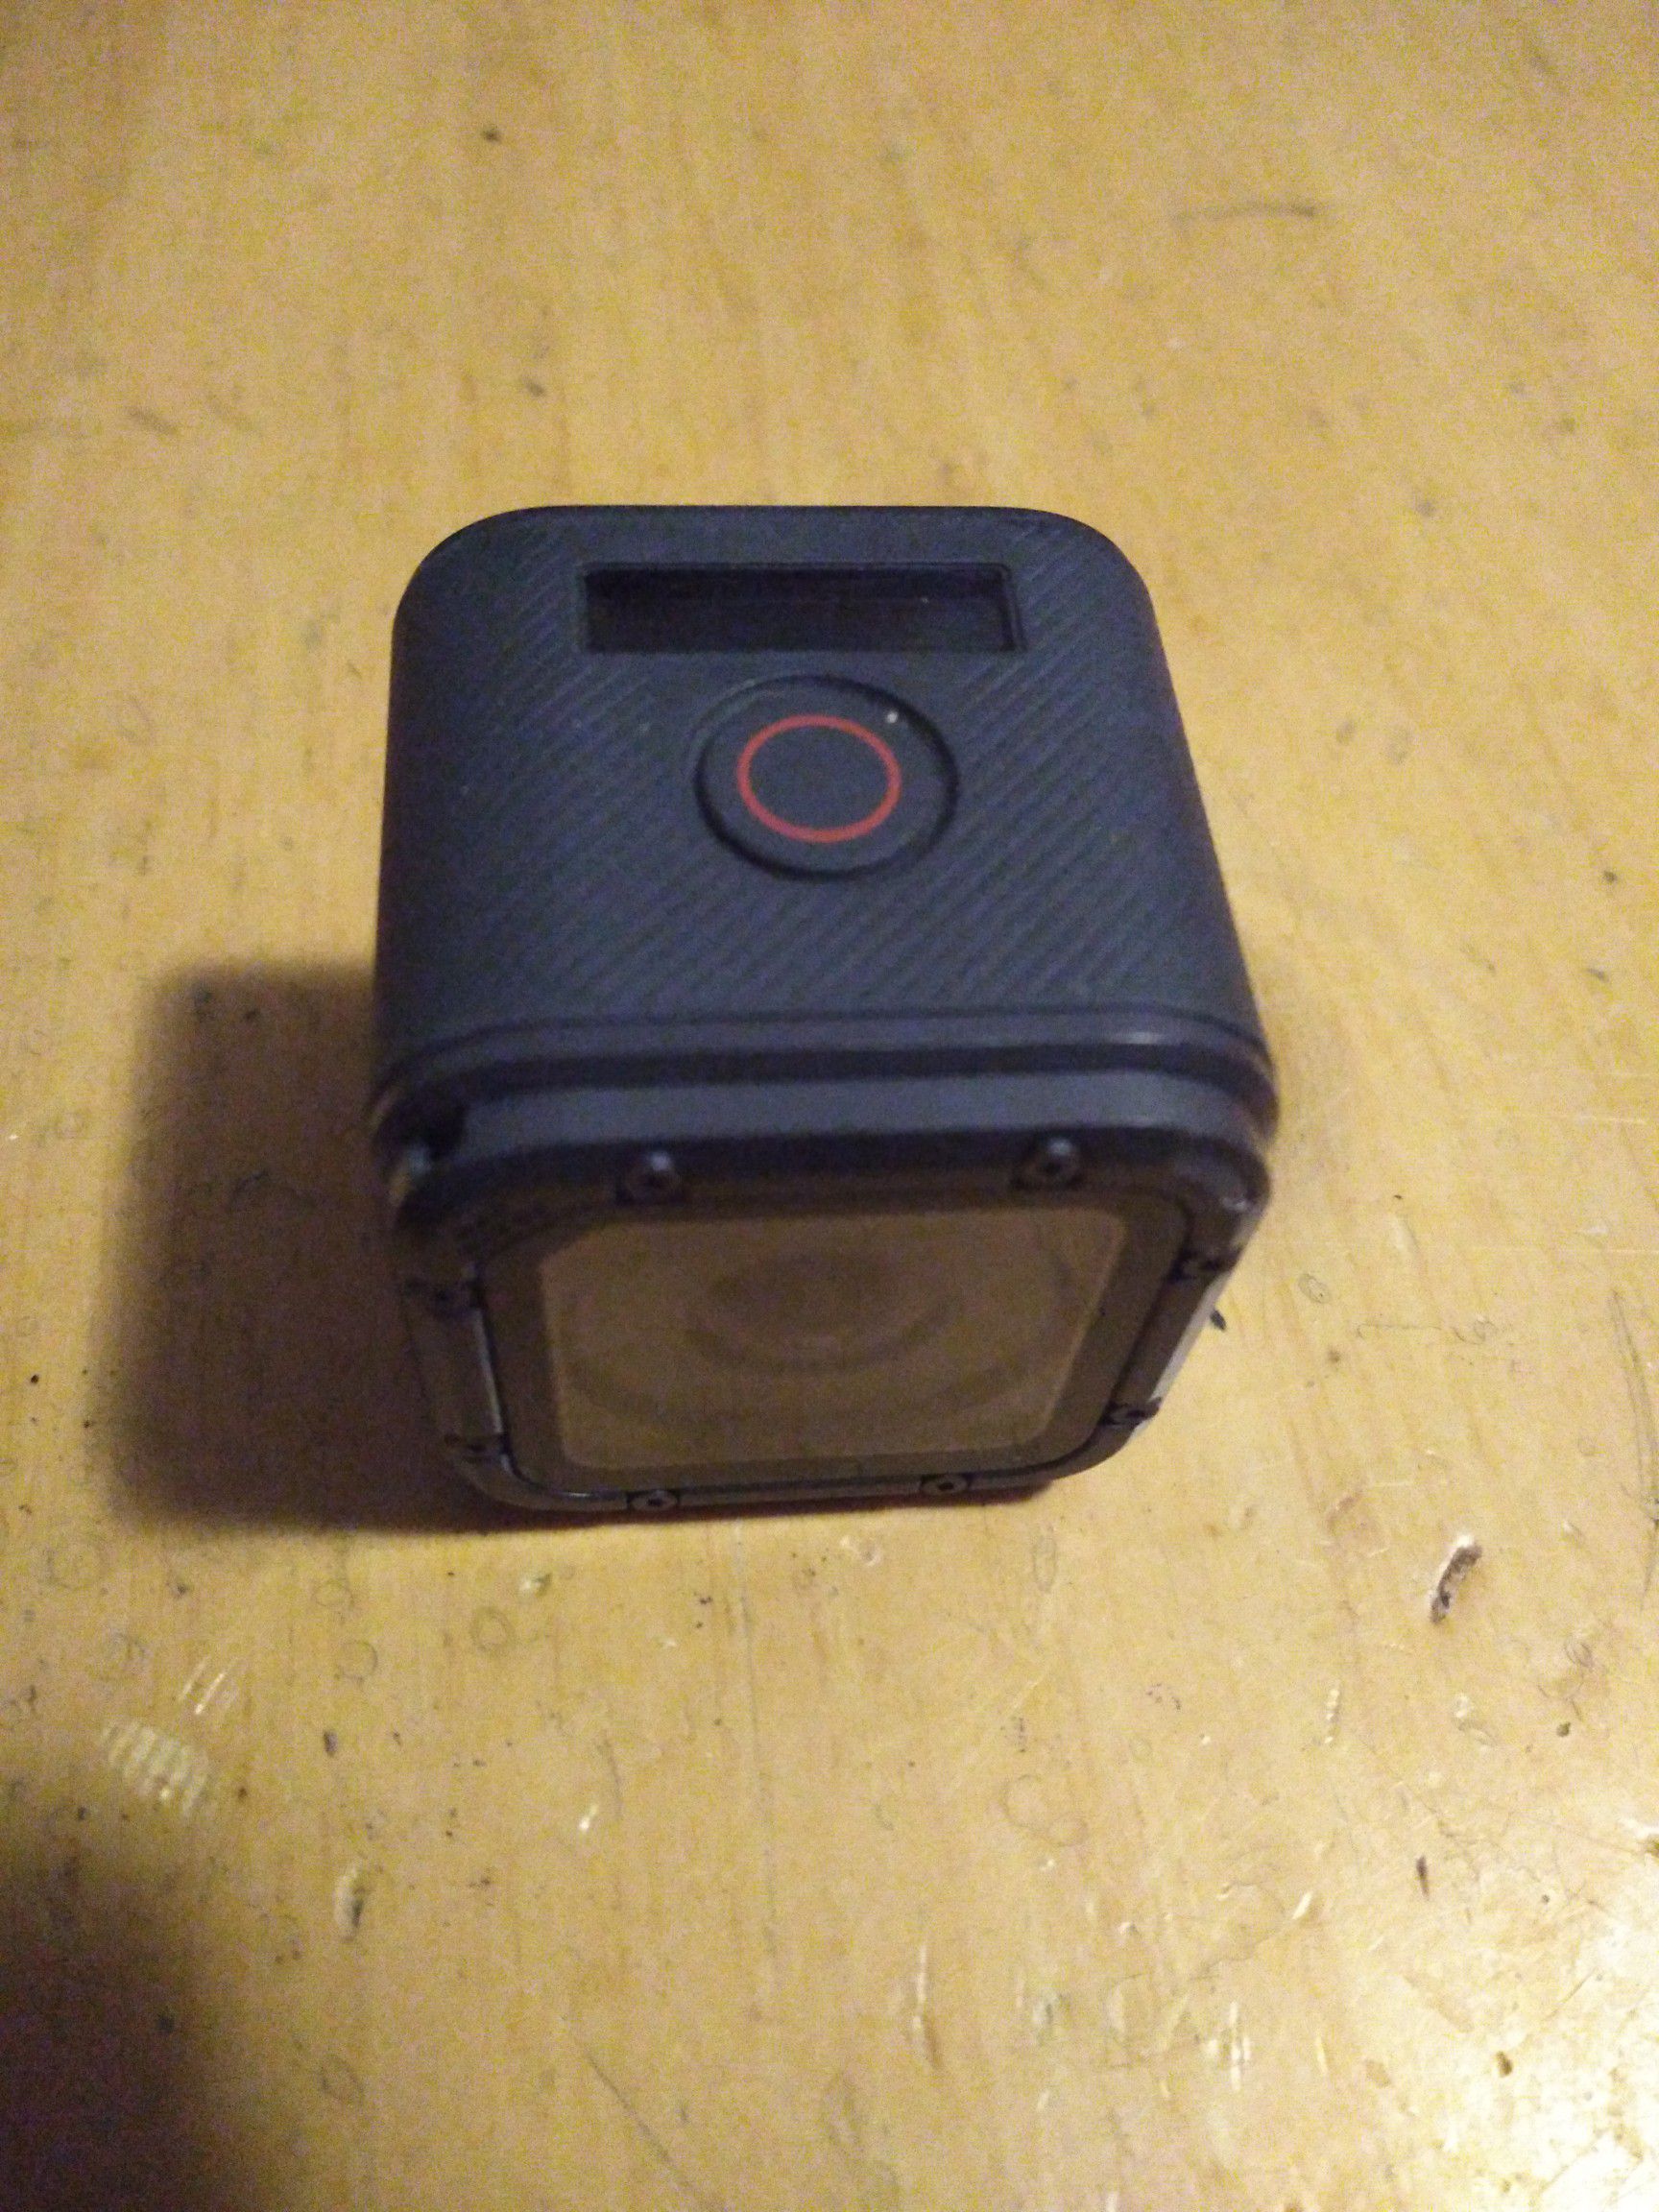 GoPro hero5 good condition works perfect selling $85